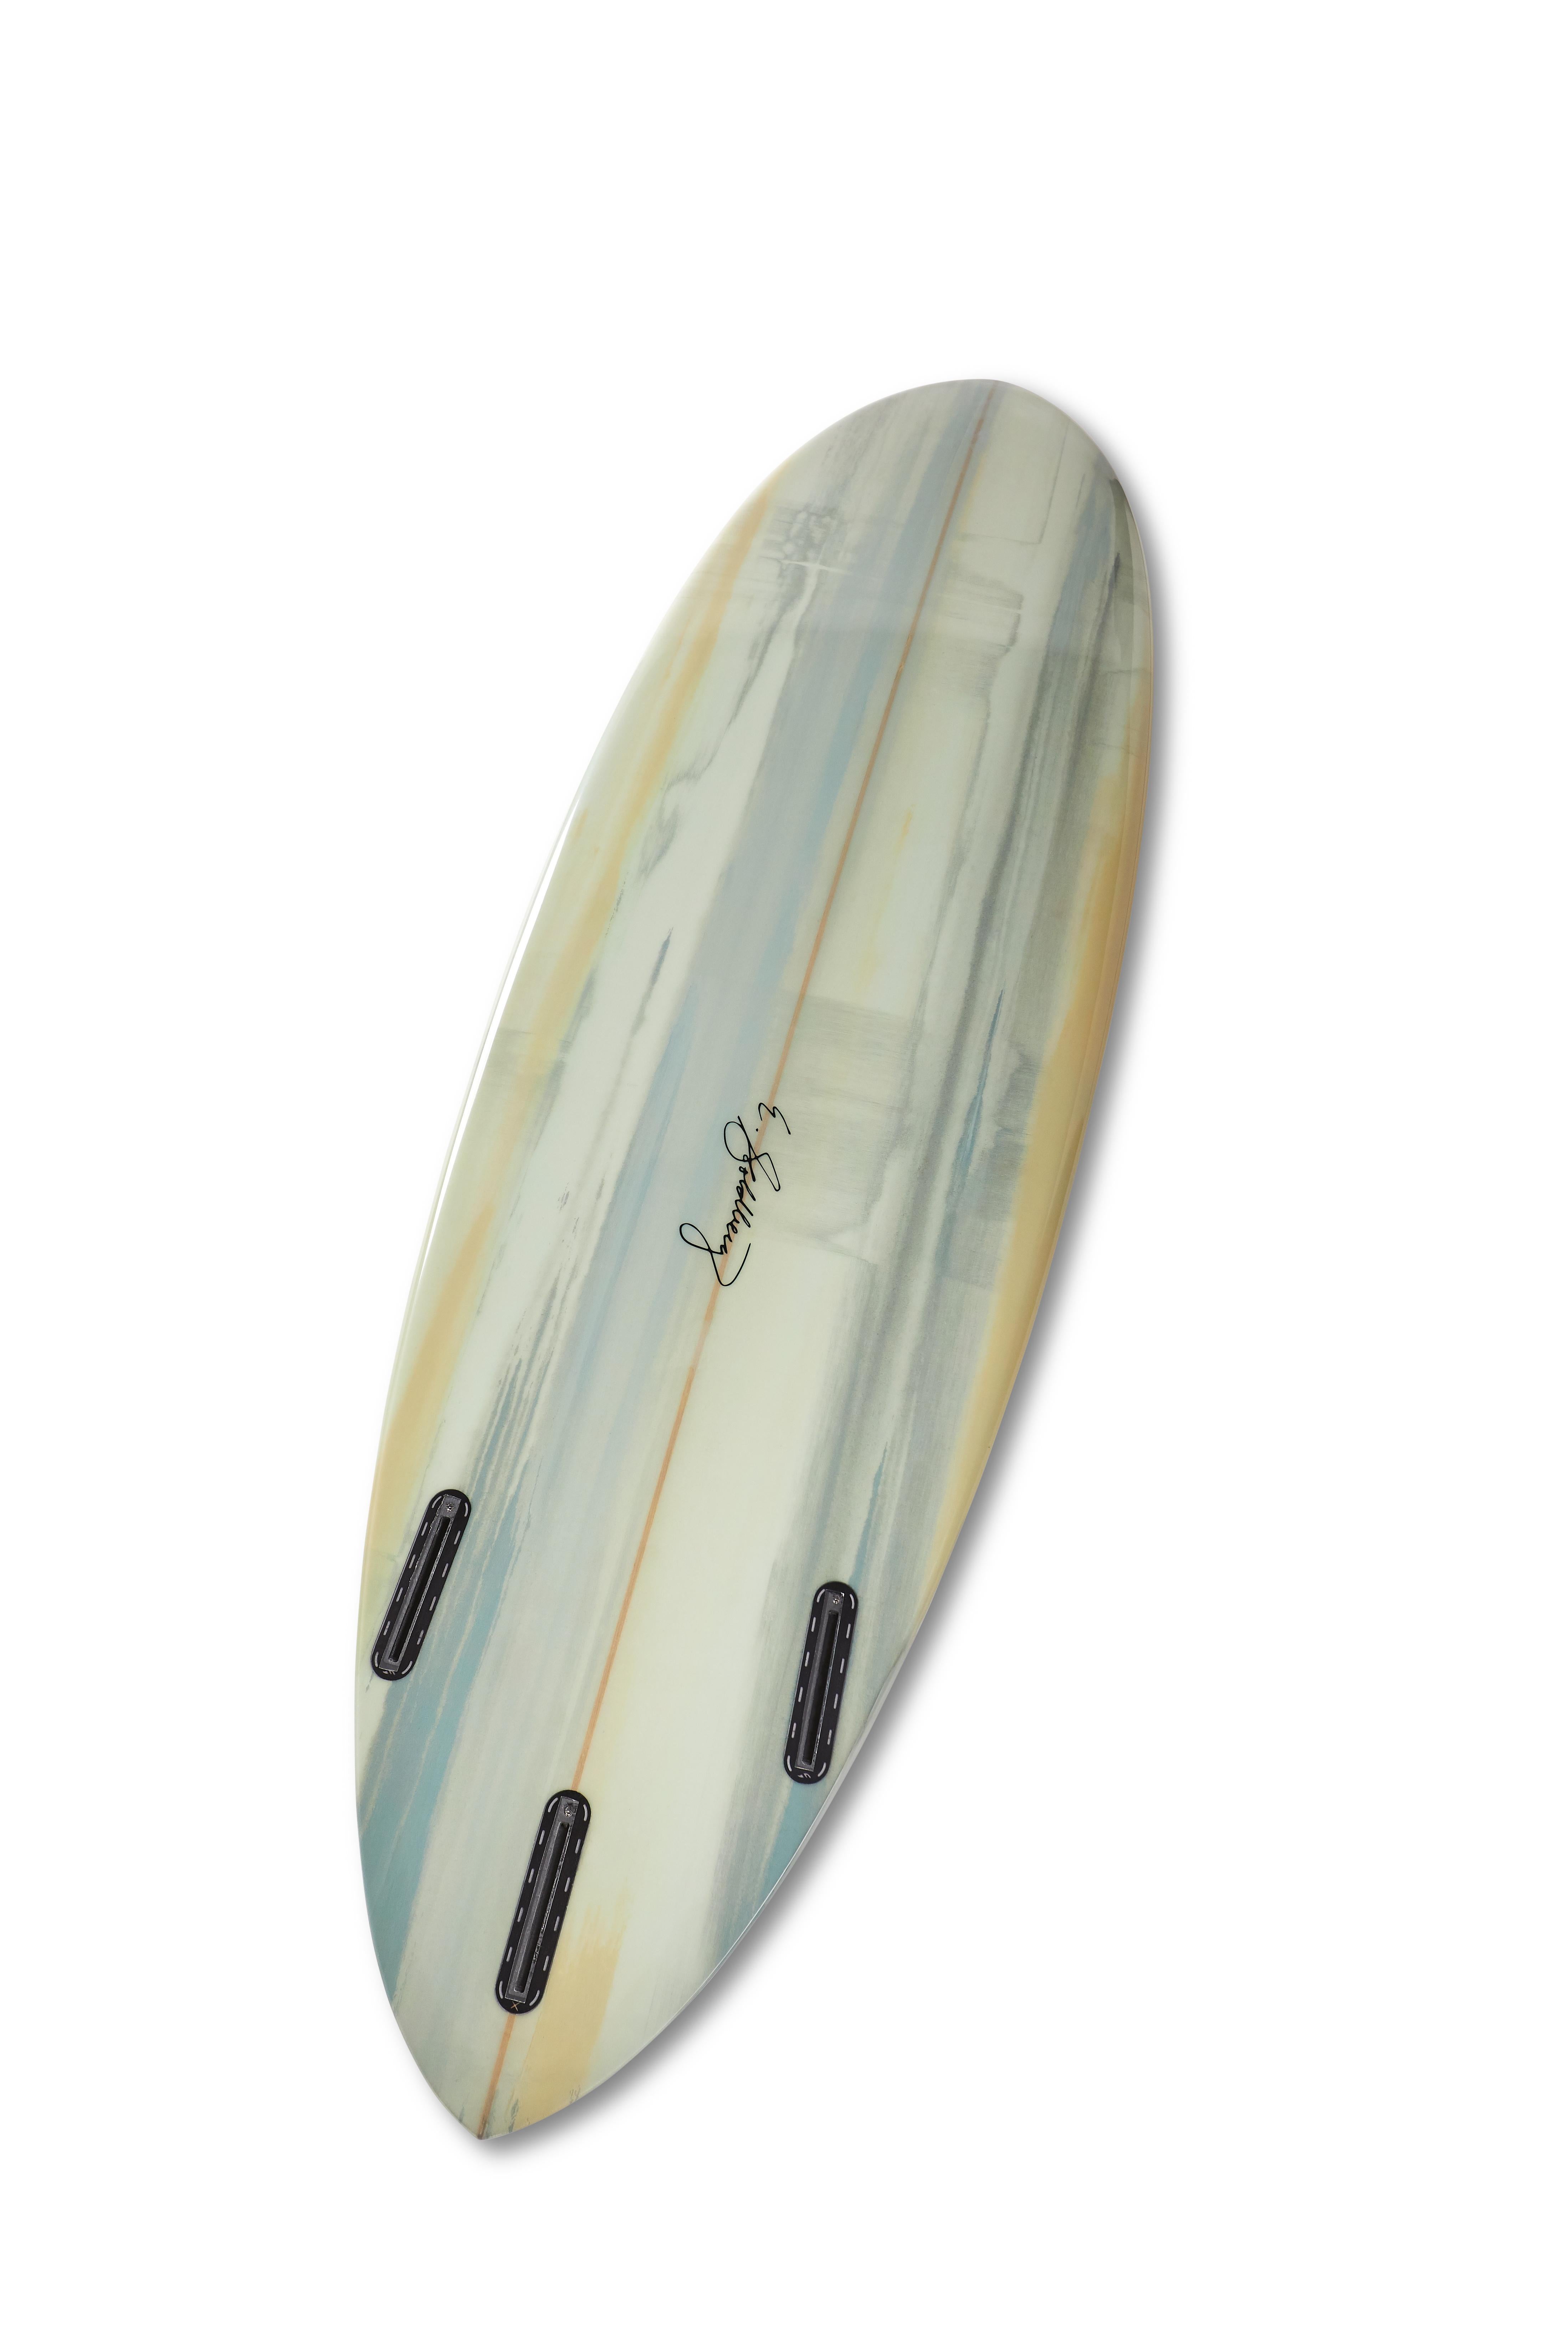 Erik Skoldberg
Titanium, 2018
Fiberglass and Acrylic
6'6


Erik Skoldberg is a contemporary artist who reaches beyond the canvas, building a master collection of paintings, surfboards and interactive installations. His combination of energetically